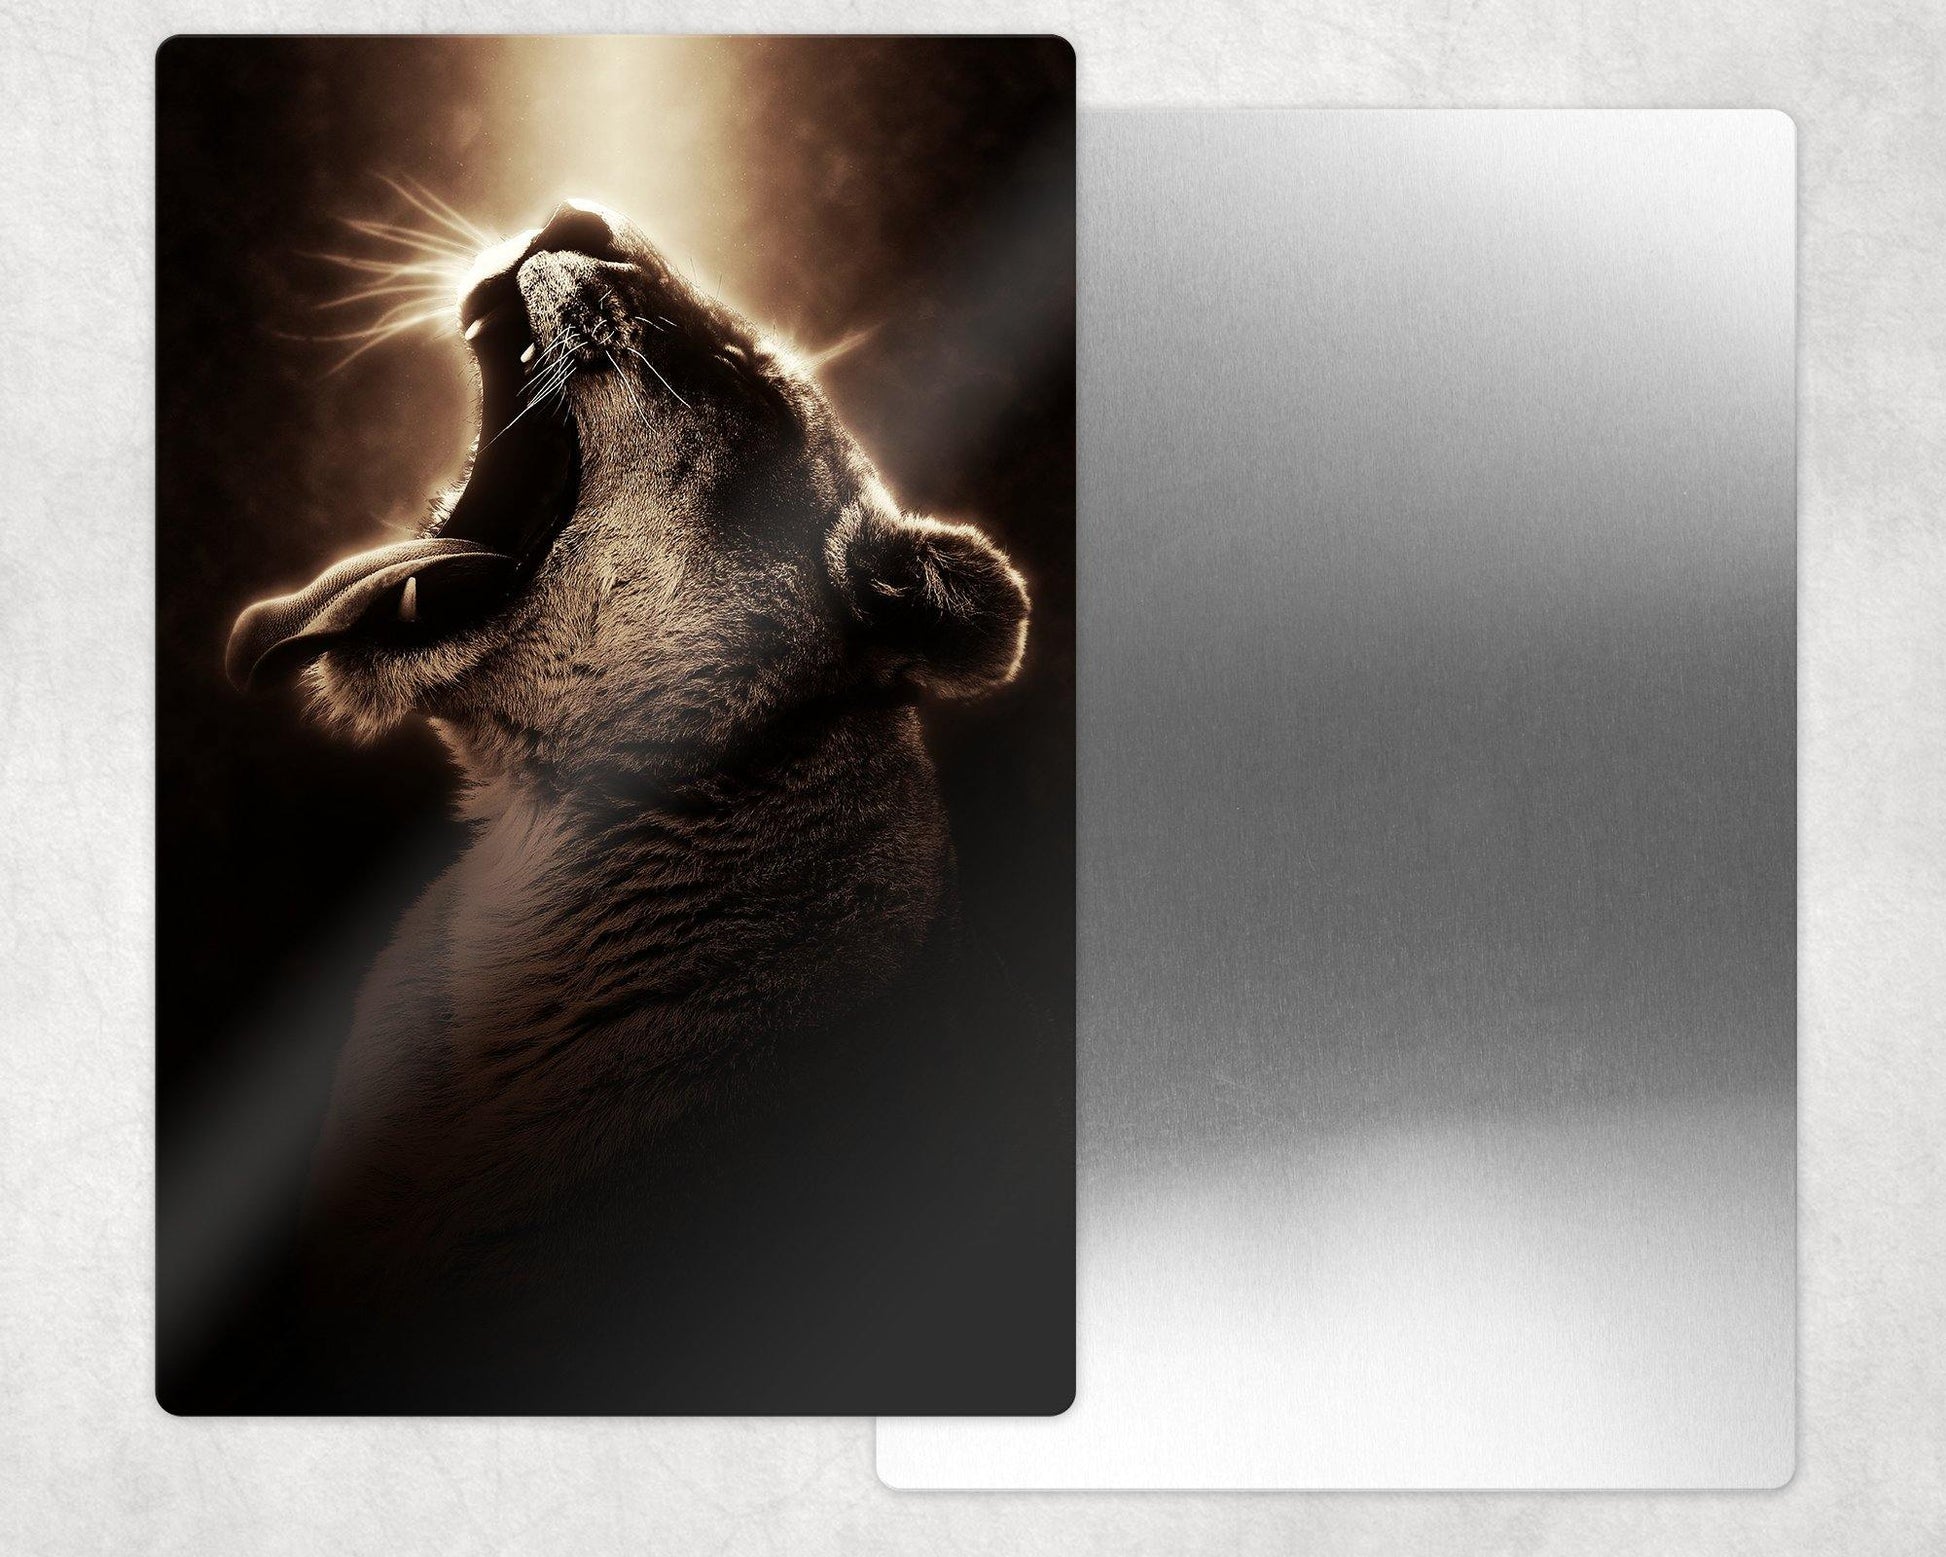 Roaring Lioness Metal Photo Panel - 8x12 or 12x18 - Schoppix Gifts